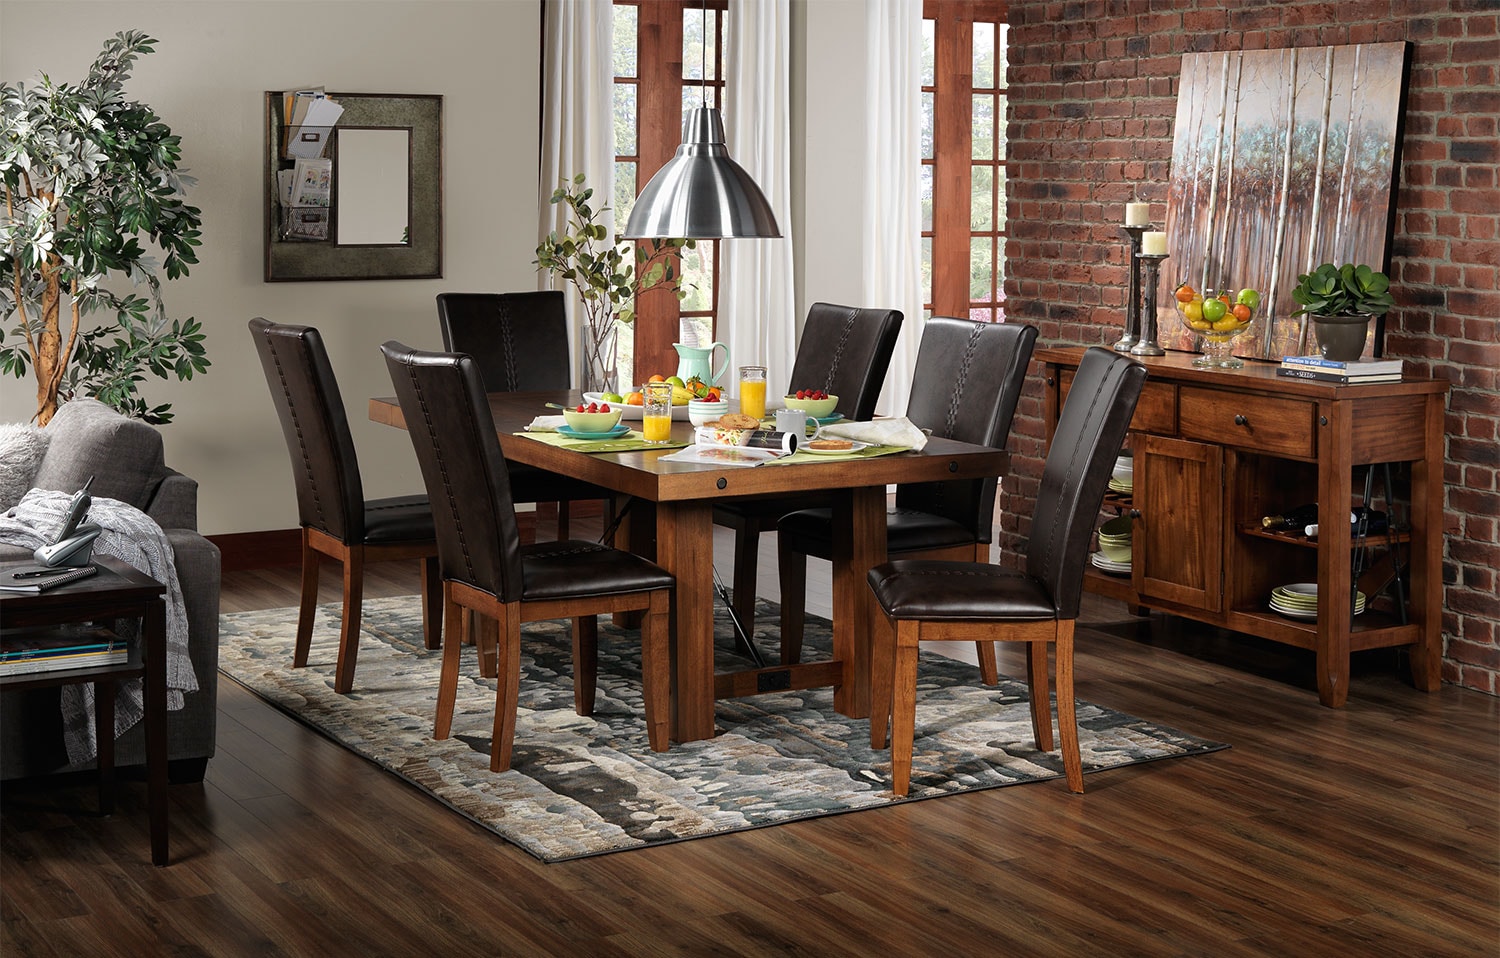 7 Piece Dining Room Set Under $500 That Will Surprise You